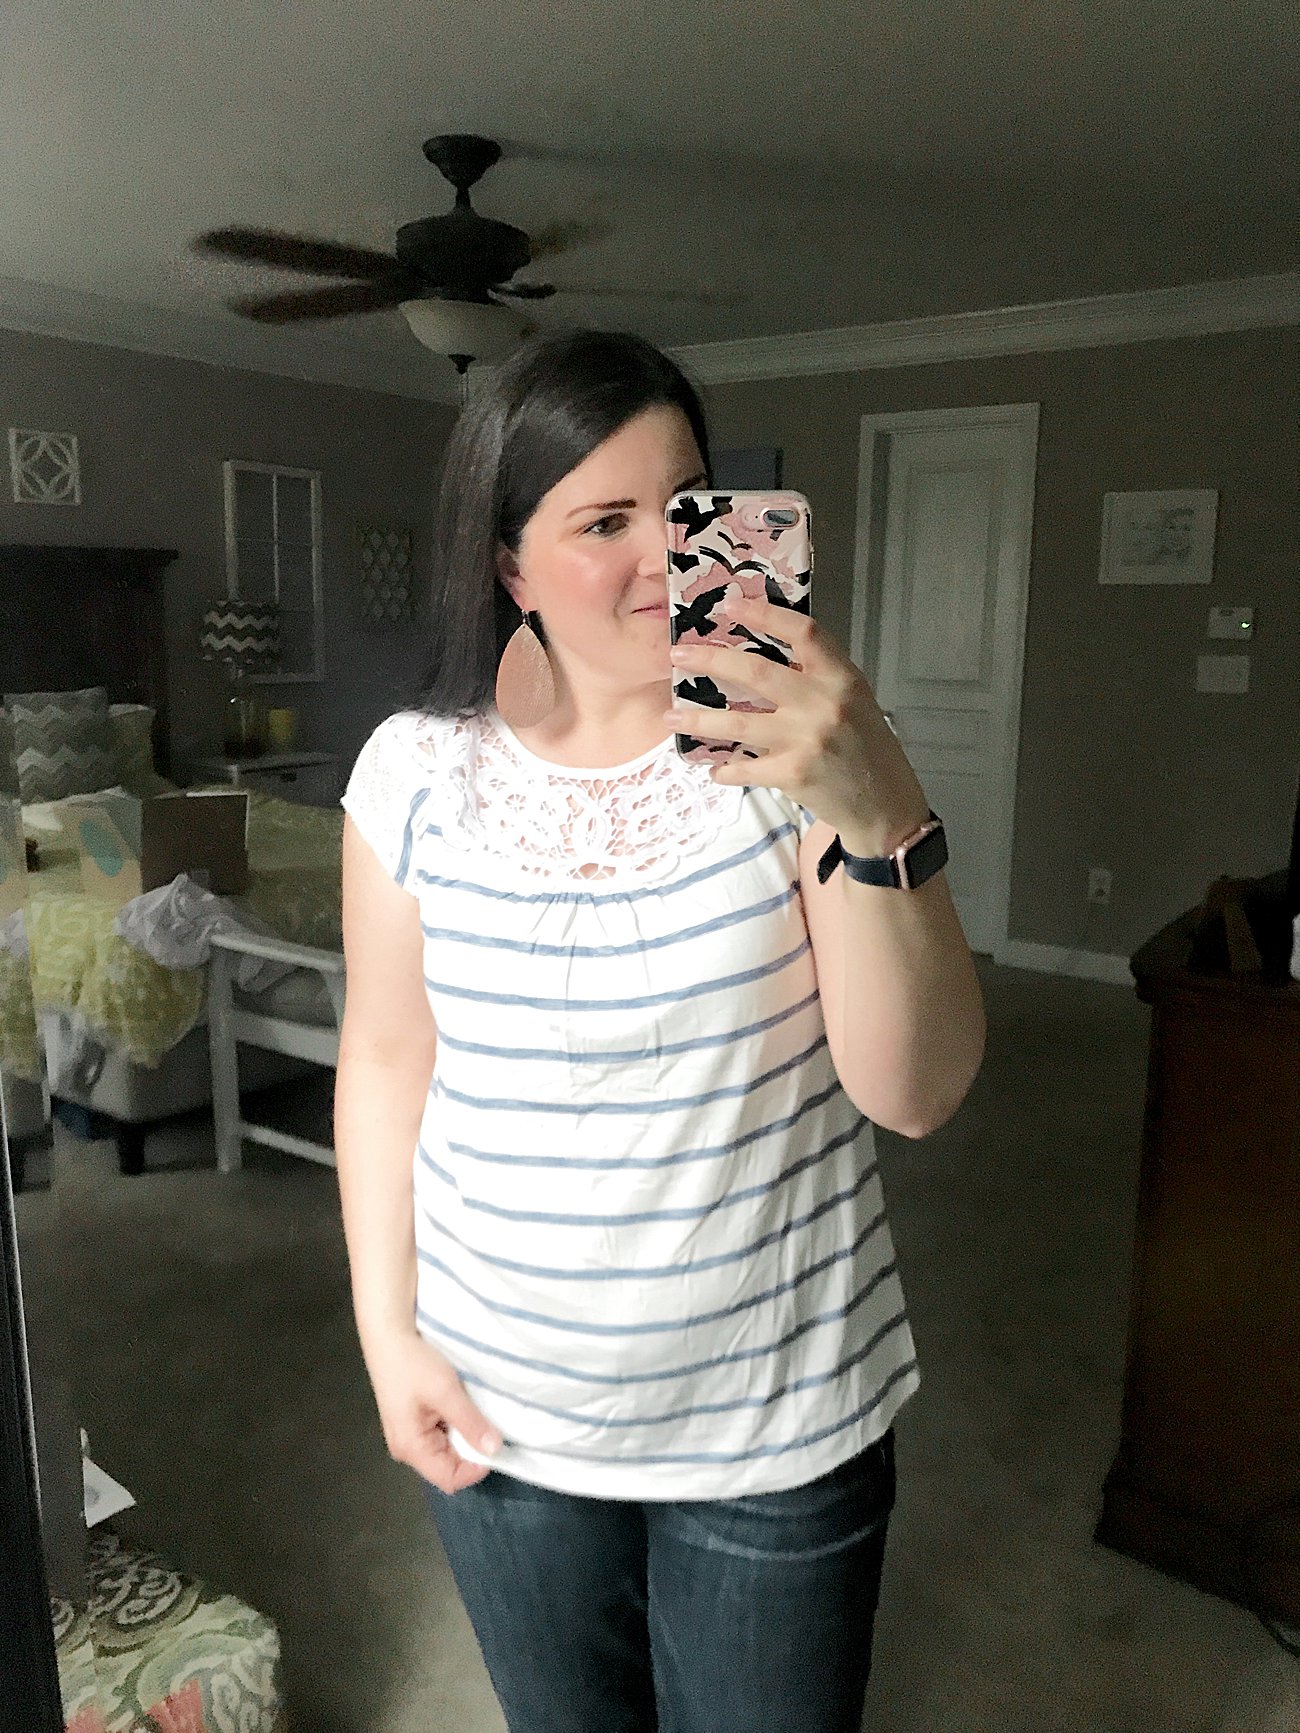 SKIES ARE BLUE Mishella Lace Yoke Knit Top - SIZE: L - $58 - Stitch Fix Review #46 by popular North Carolina ethical fashion blogger Still Being Molly